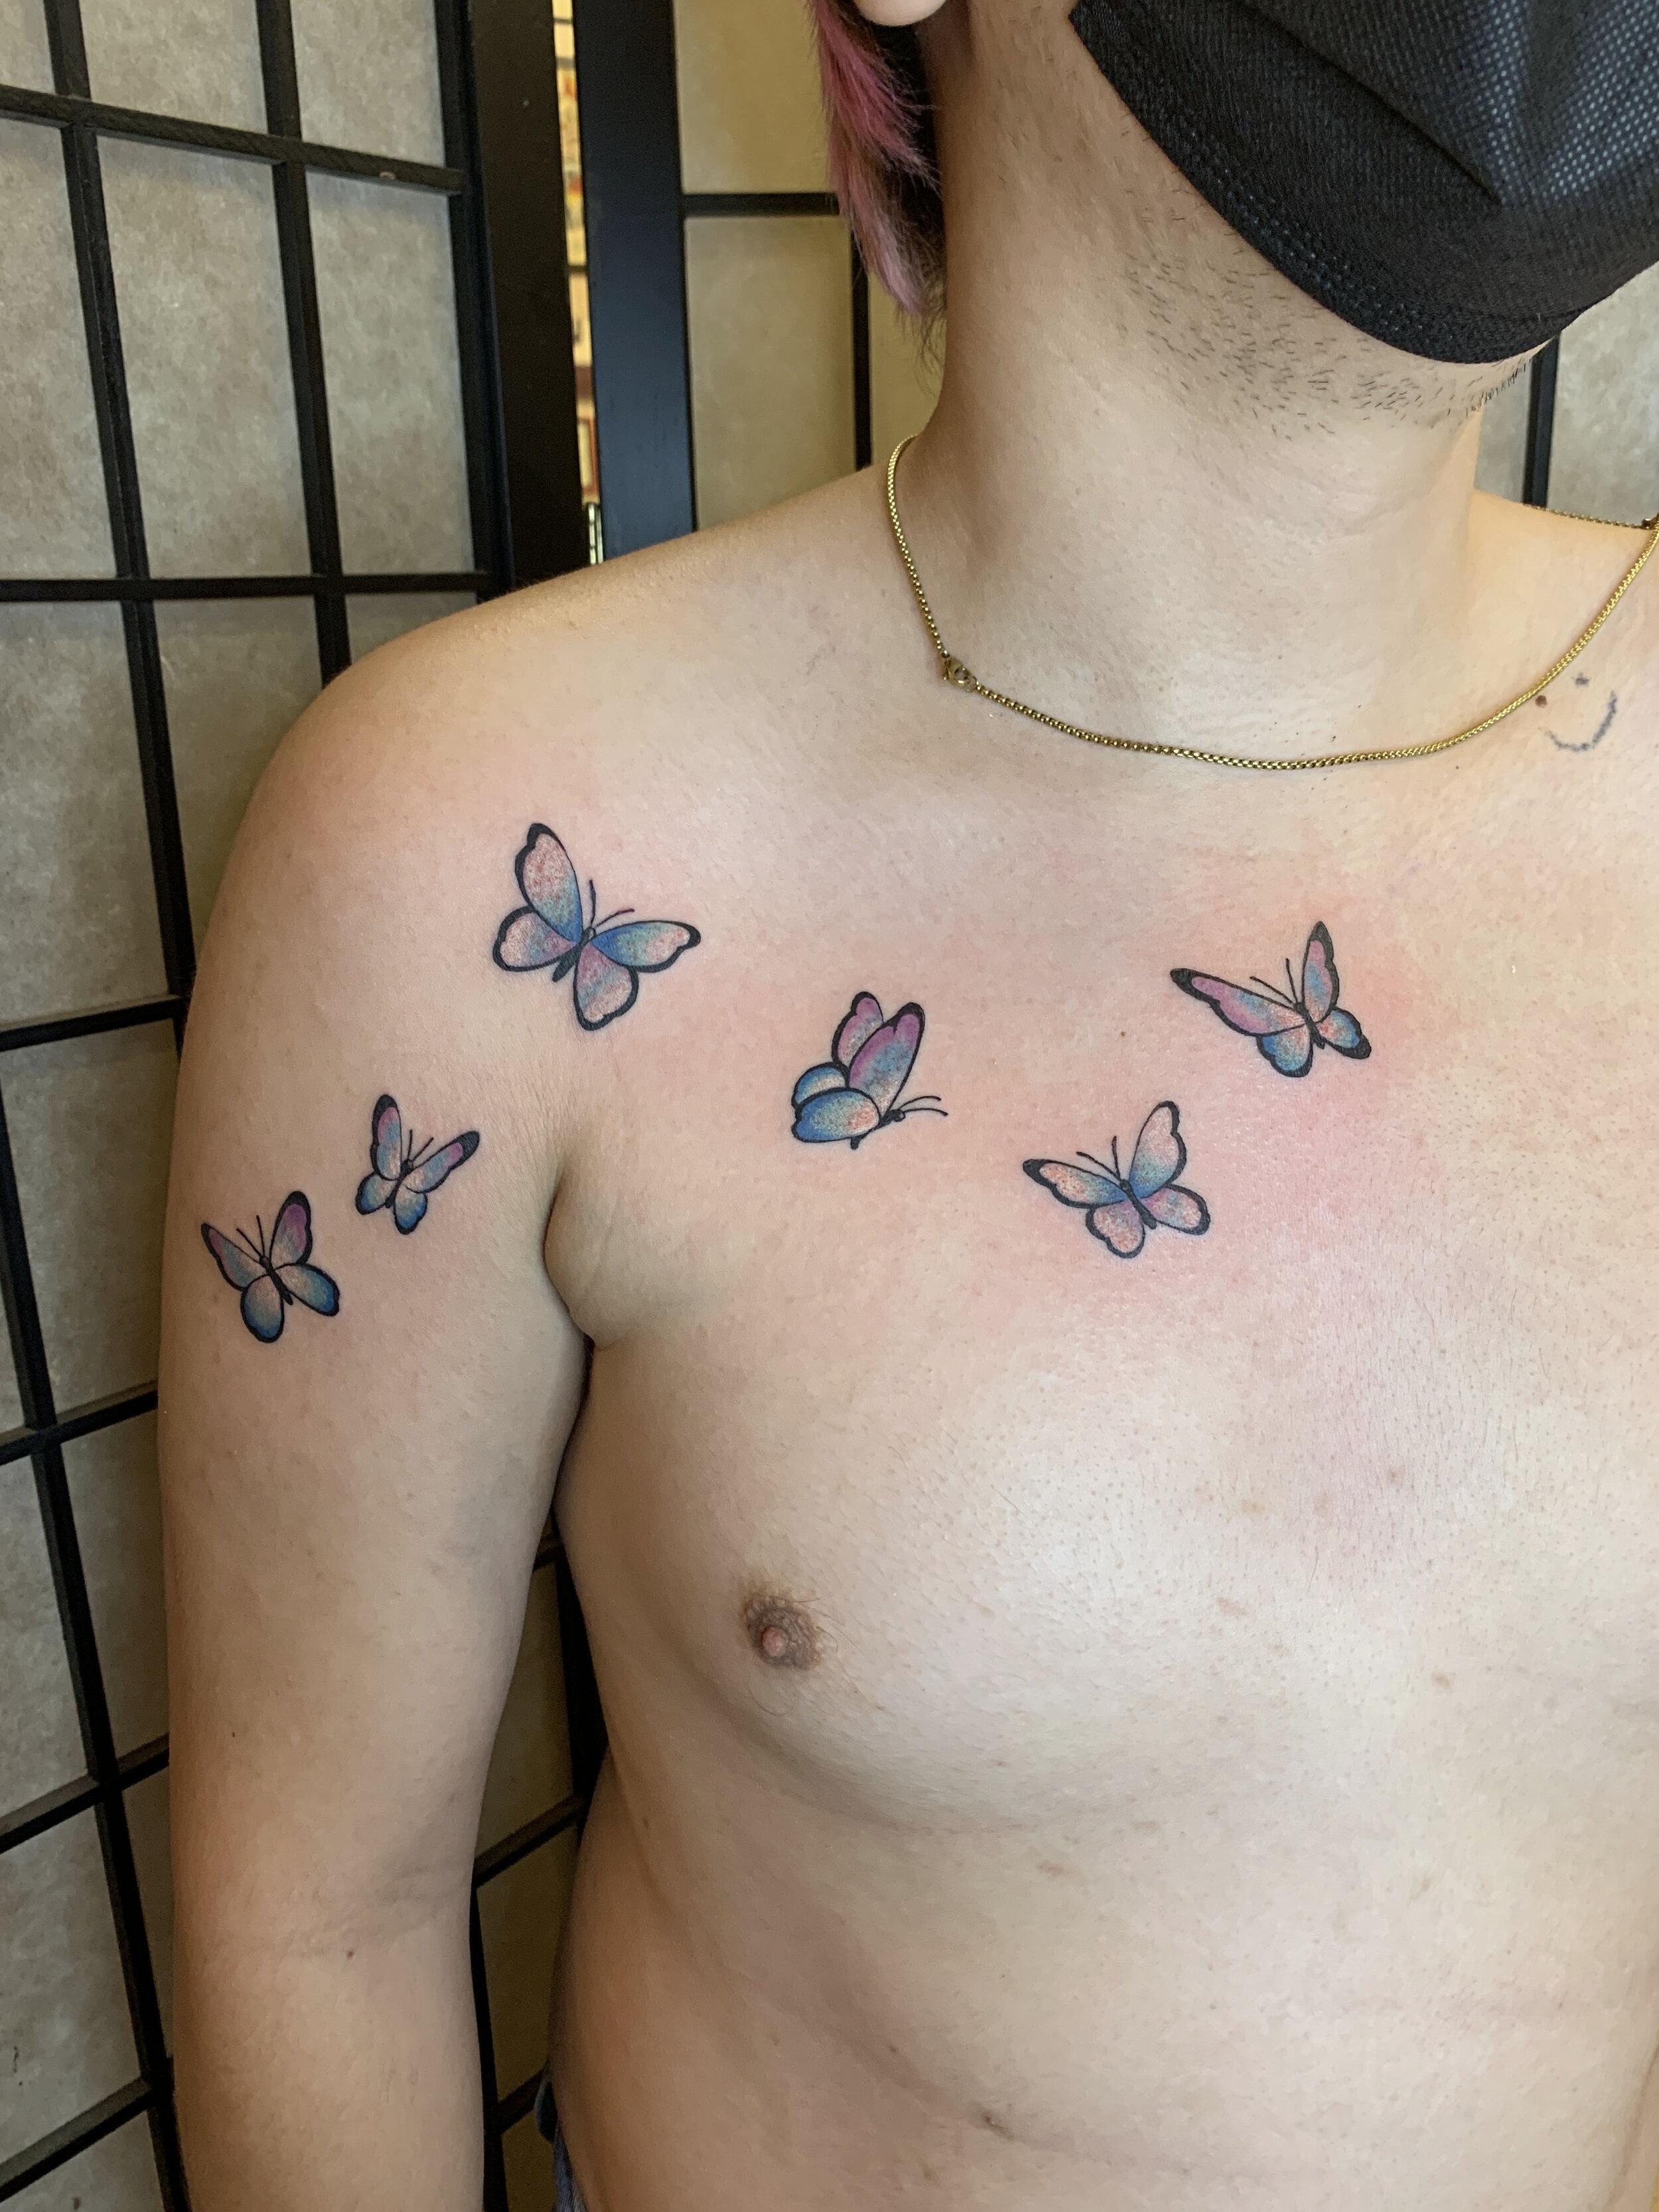 A woman with a butterfly tattoo on her chest photo  Free Fashion Image on  Unsplash